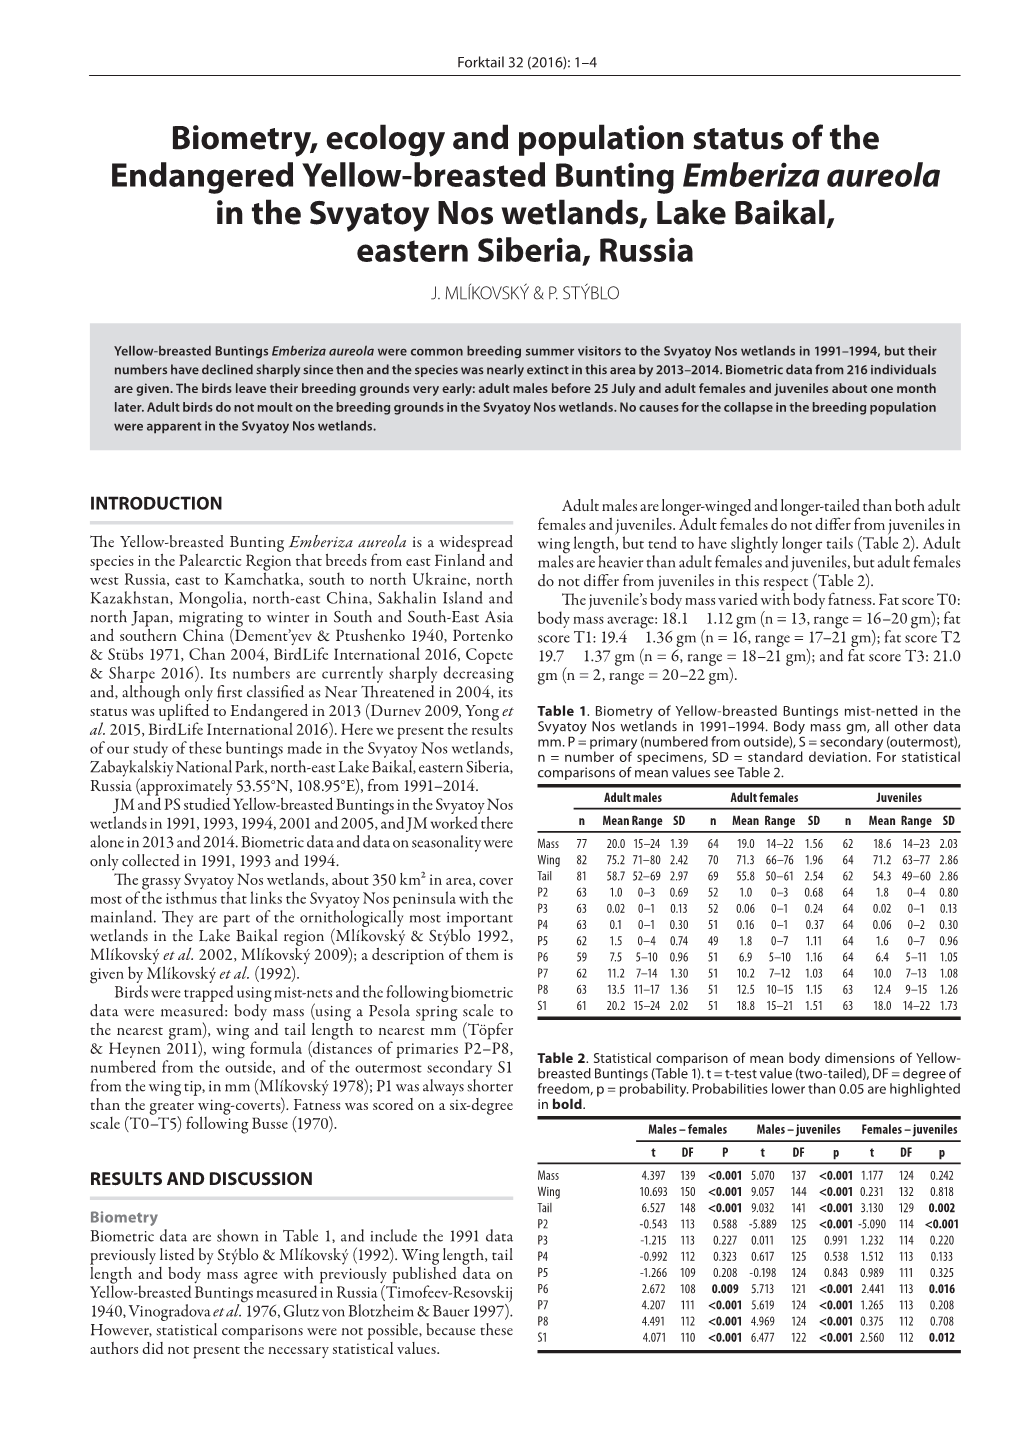 Biometry, Ecology and Population Status of the Endangered Yellow-Breasted Bunting Emberiza Aureola in the Svyatoy Nos Wetlands, Lake Baikal, Eastern Siberia, Russia J